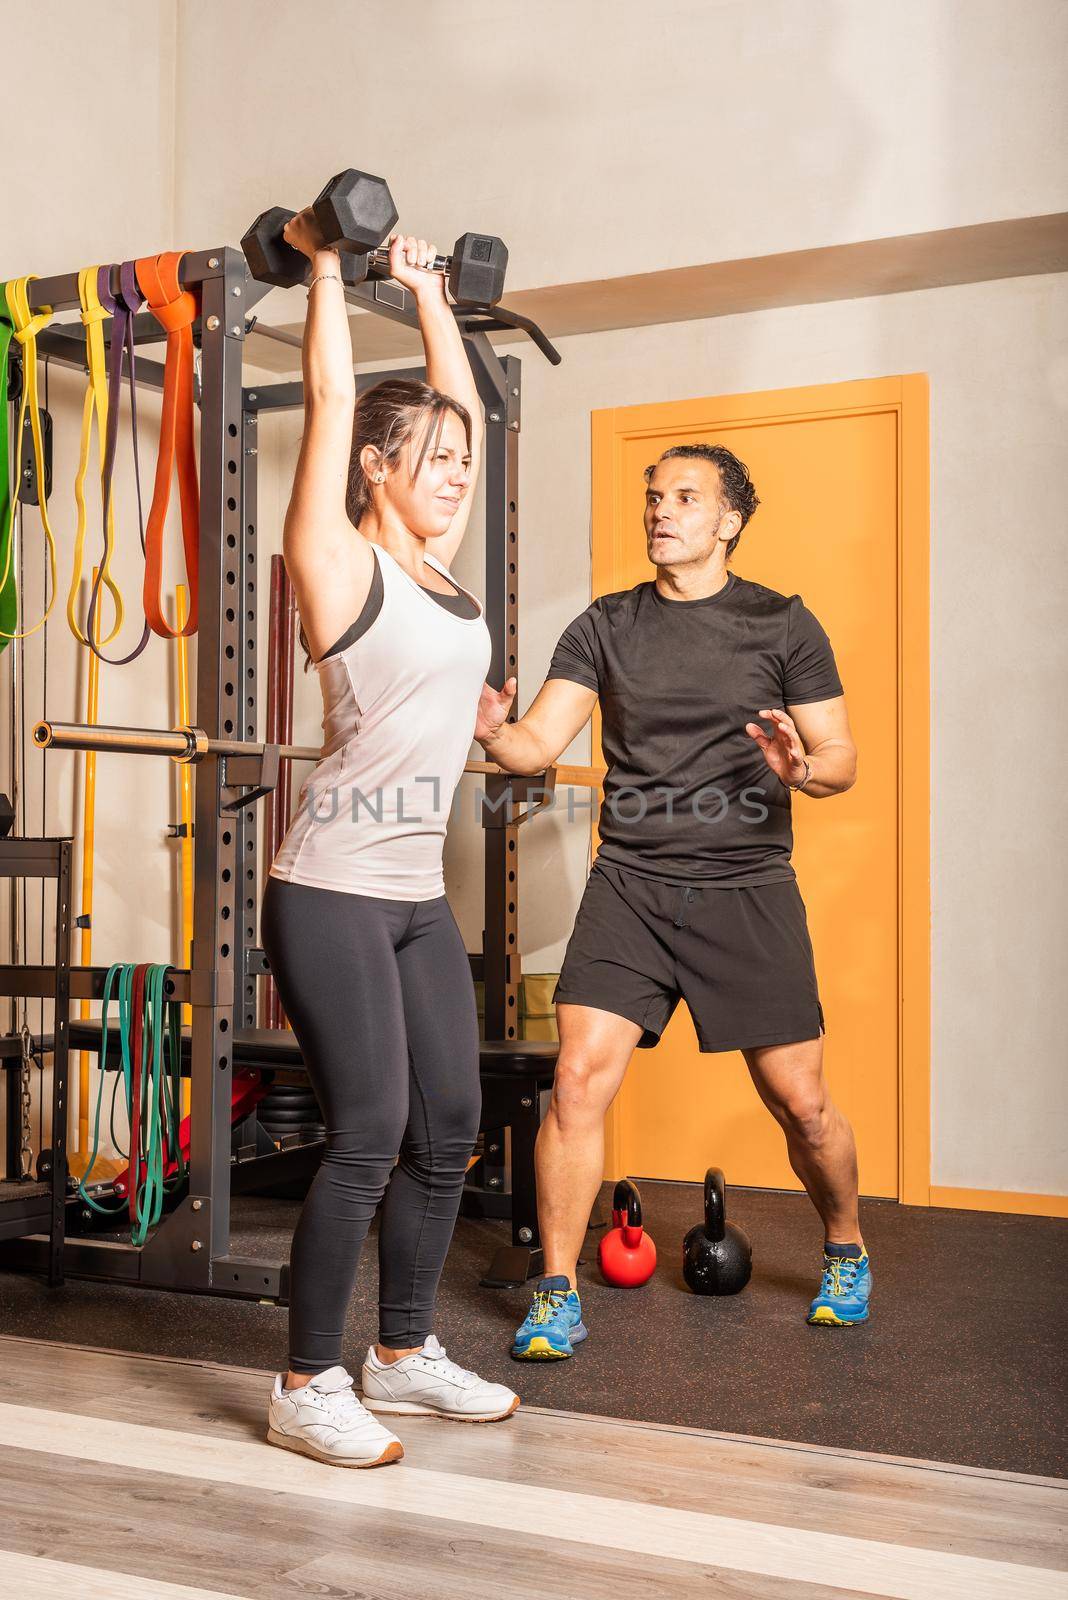 Woman doing shoulder exercise with dumbbells in the gym by ivanmoreno